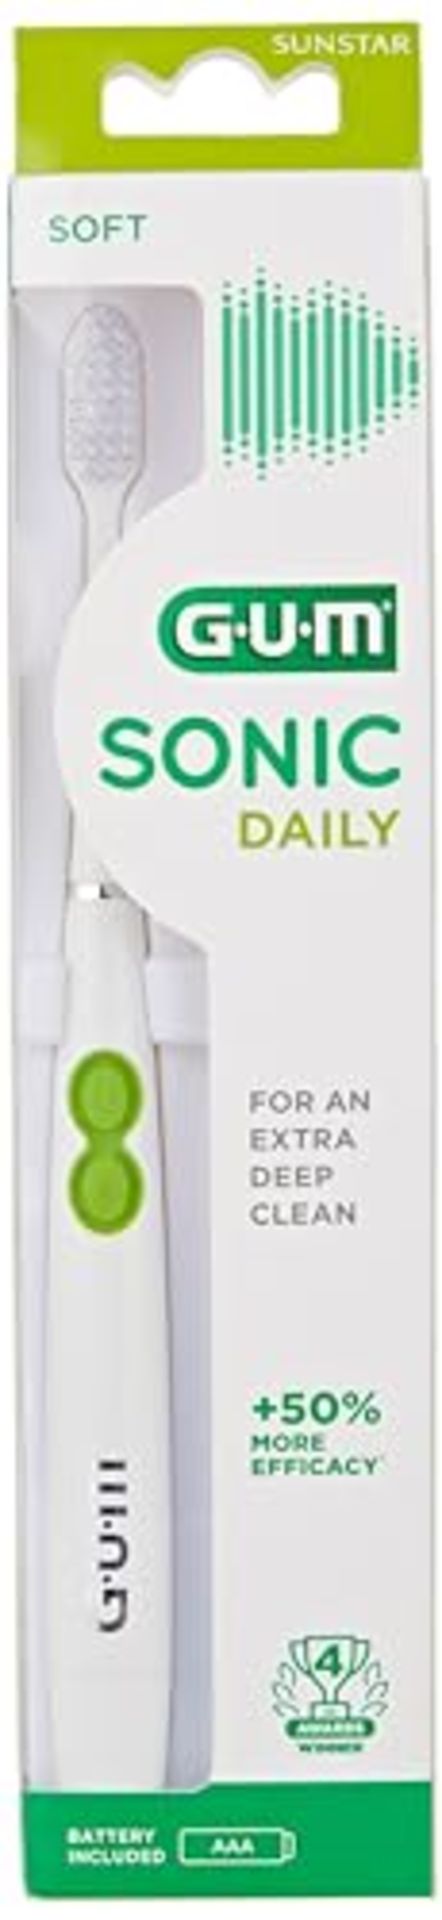 Sonic Daily Battery-powered Toothbrush in White, 1 piece